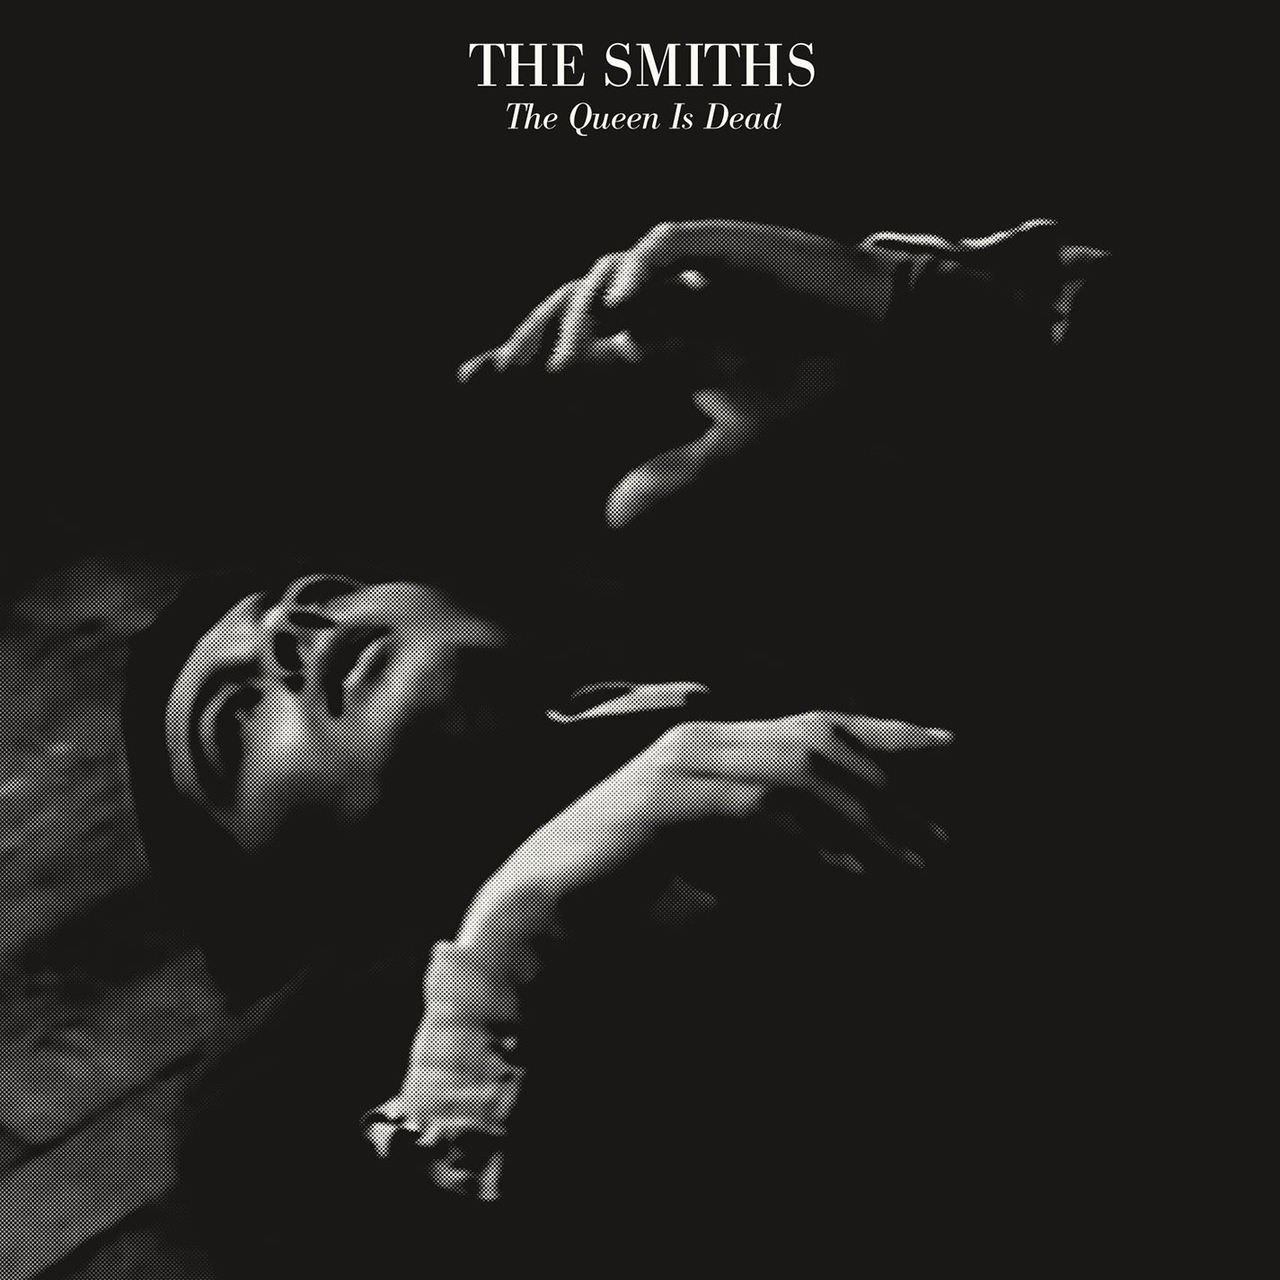 The Smiths – The Queen Is Dead (1986/2017) [Qobuz FLAC 24bit/96kHz]